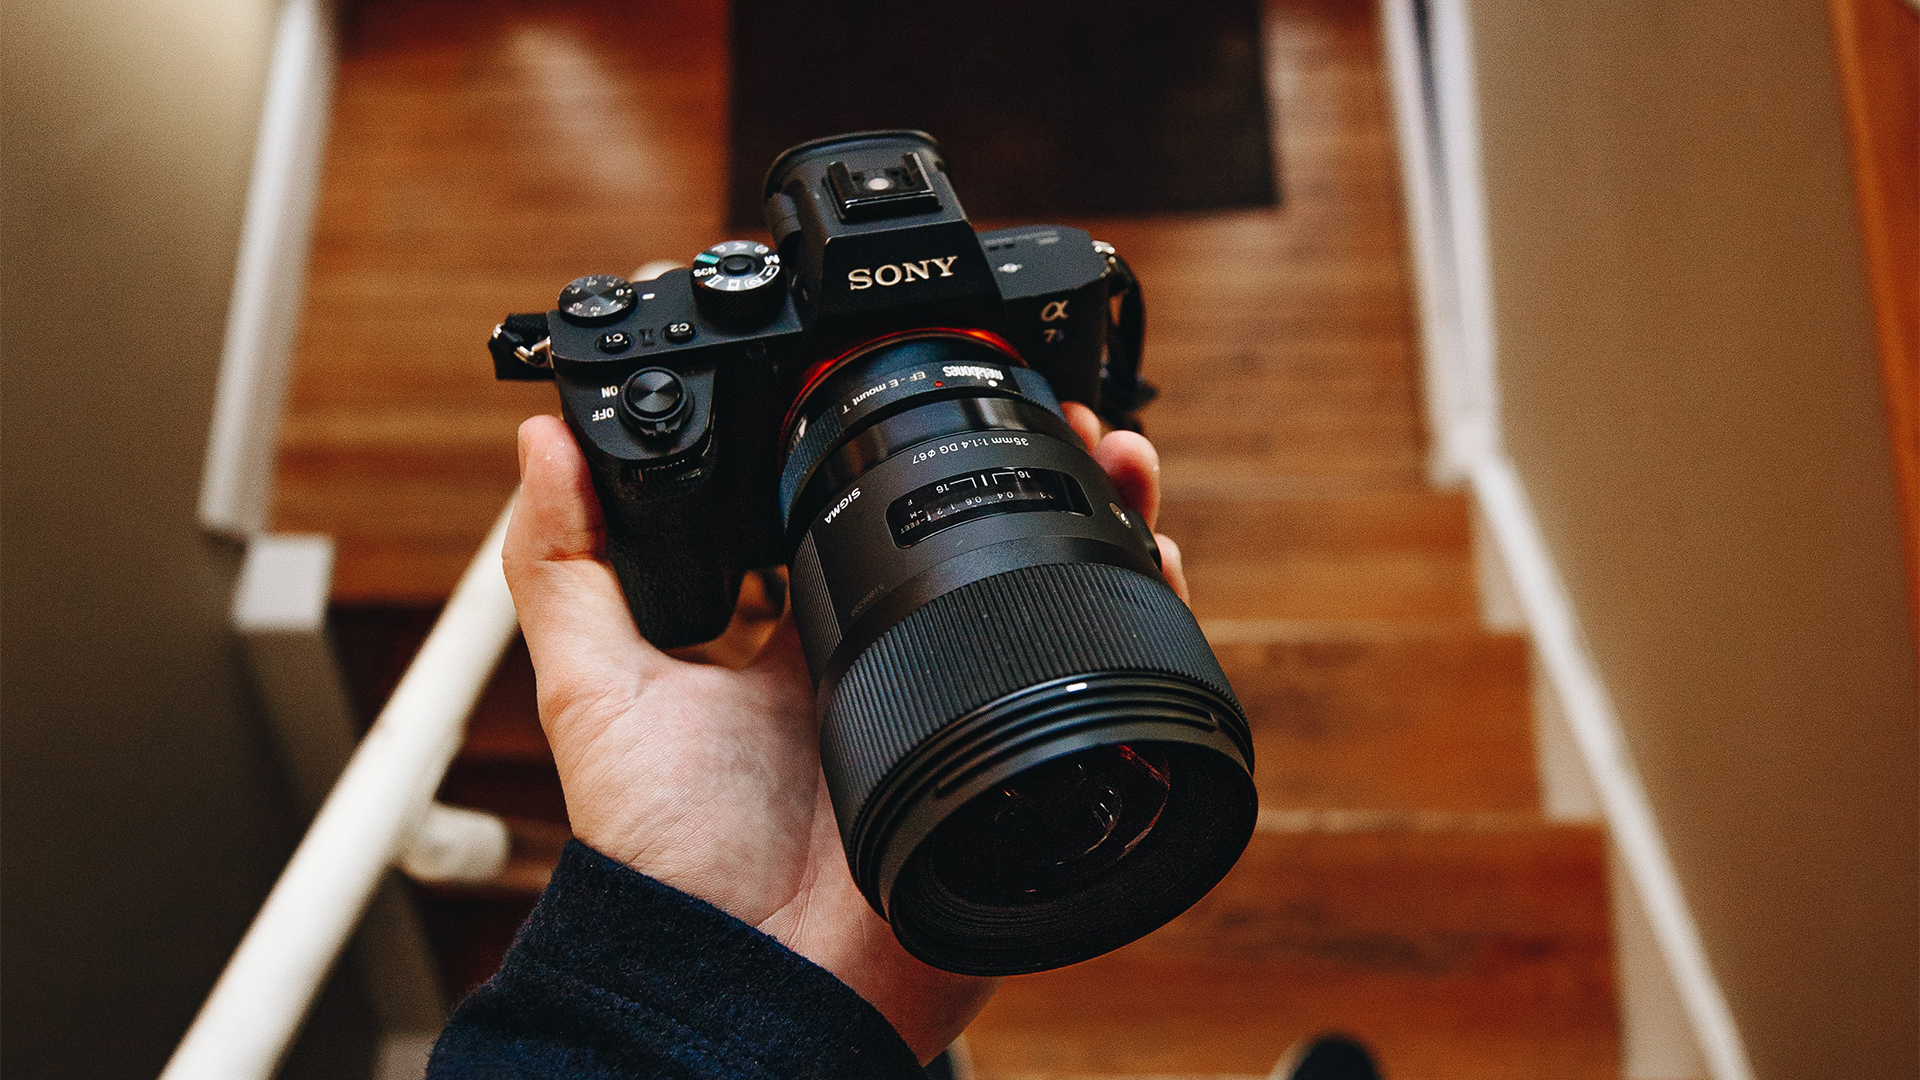 The Online Photographer: The Sad Story of the Sony A6600